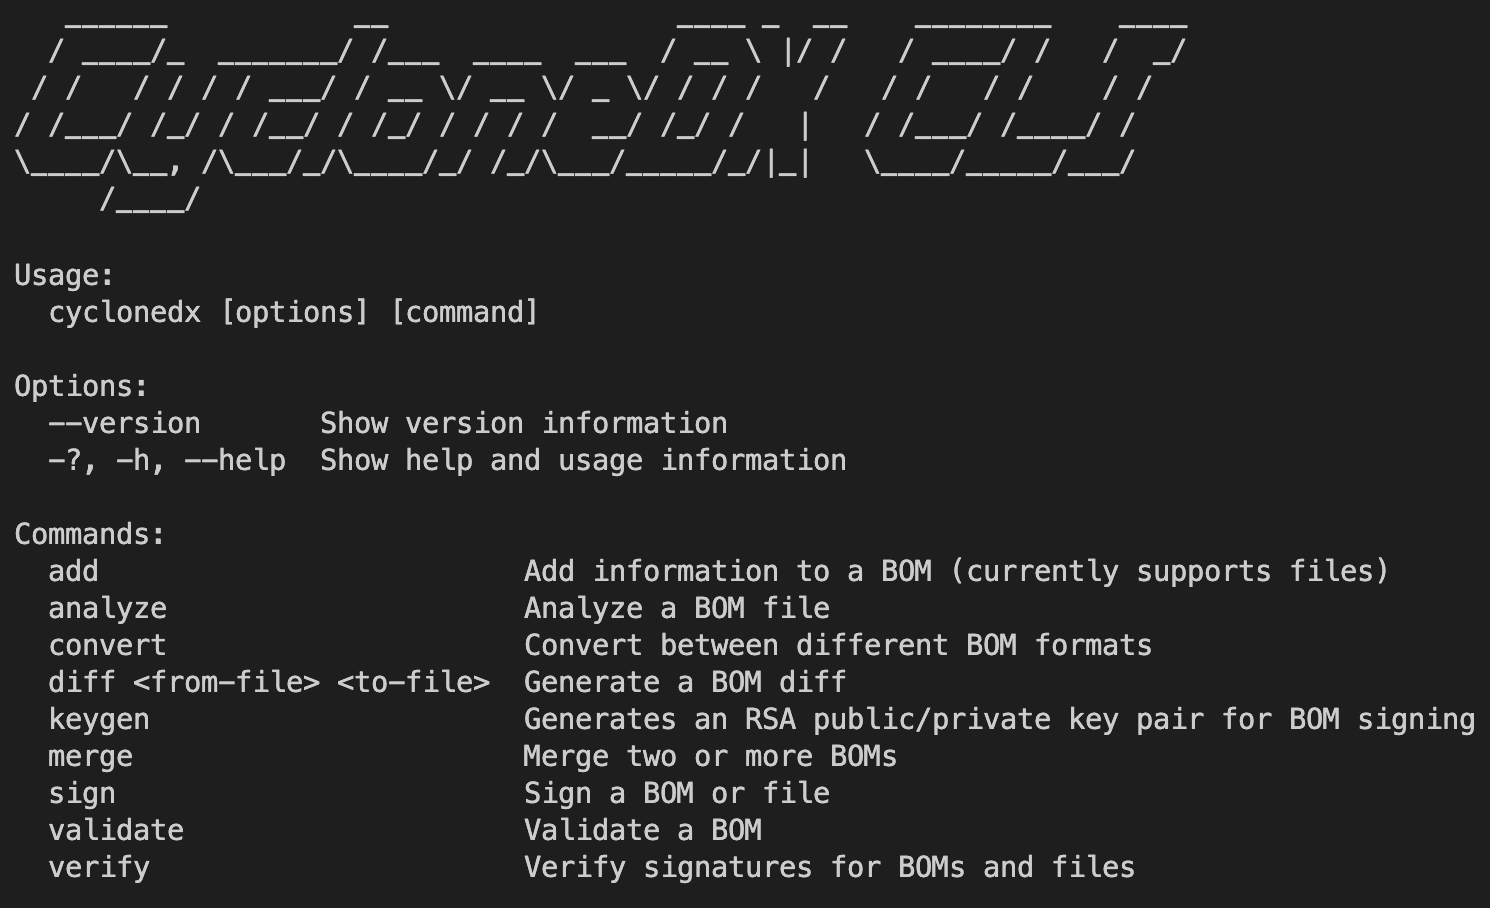 A screenshot of CycloneDX CLI showing Usage, Options, and Commands. 